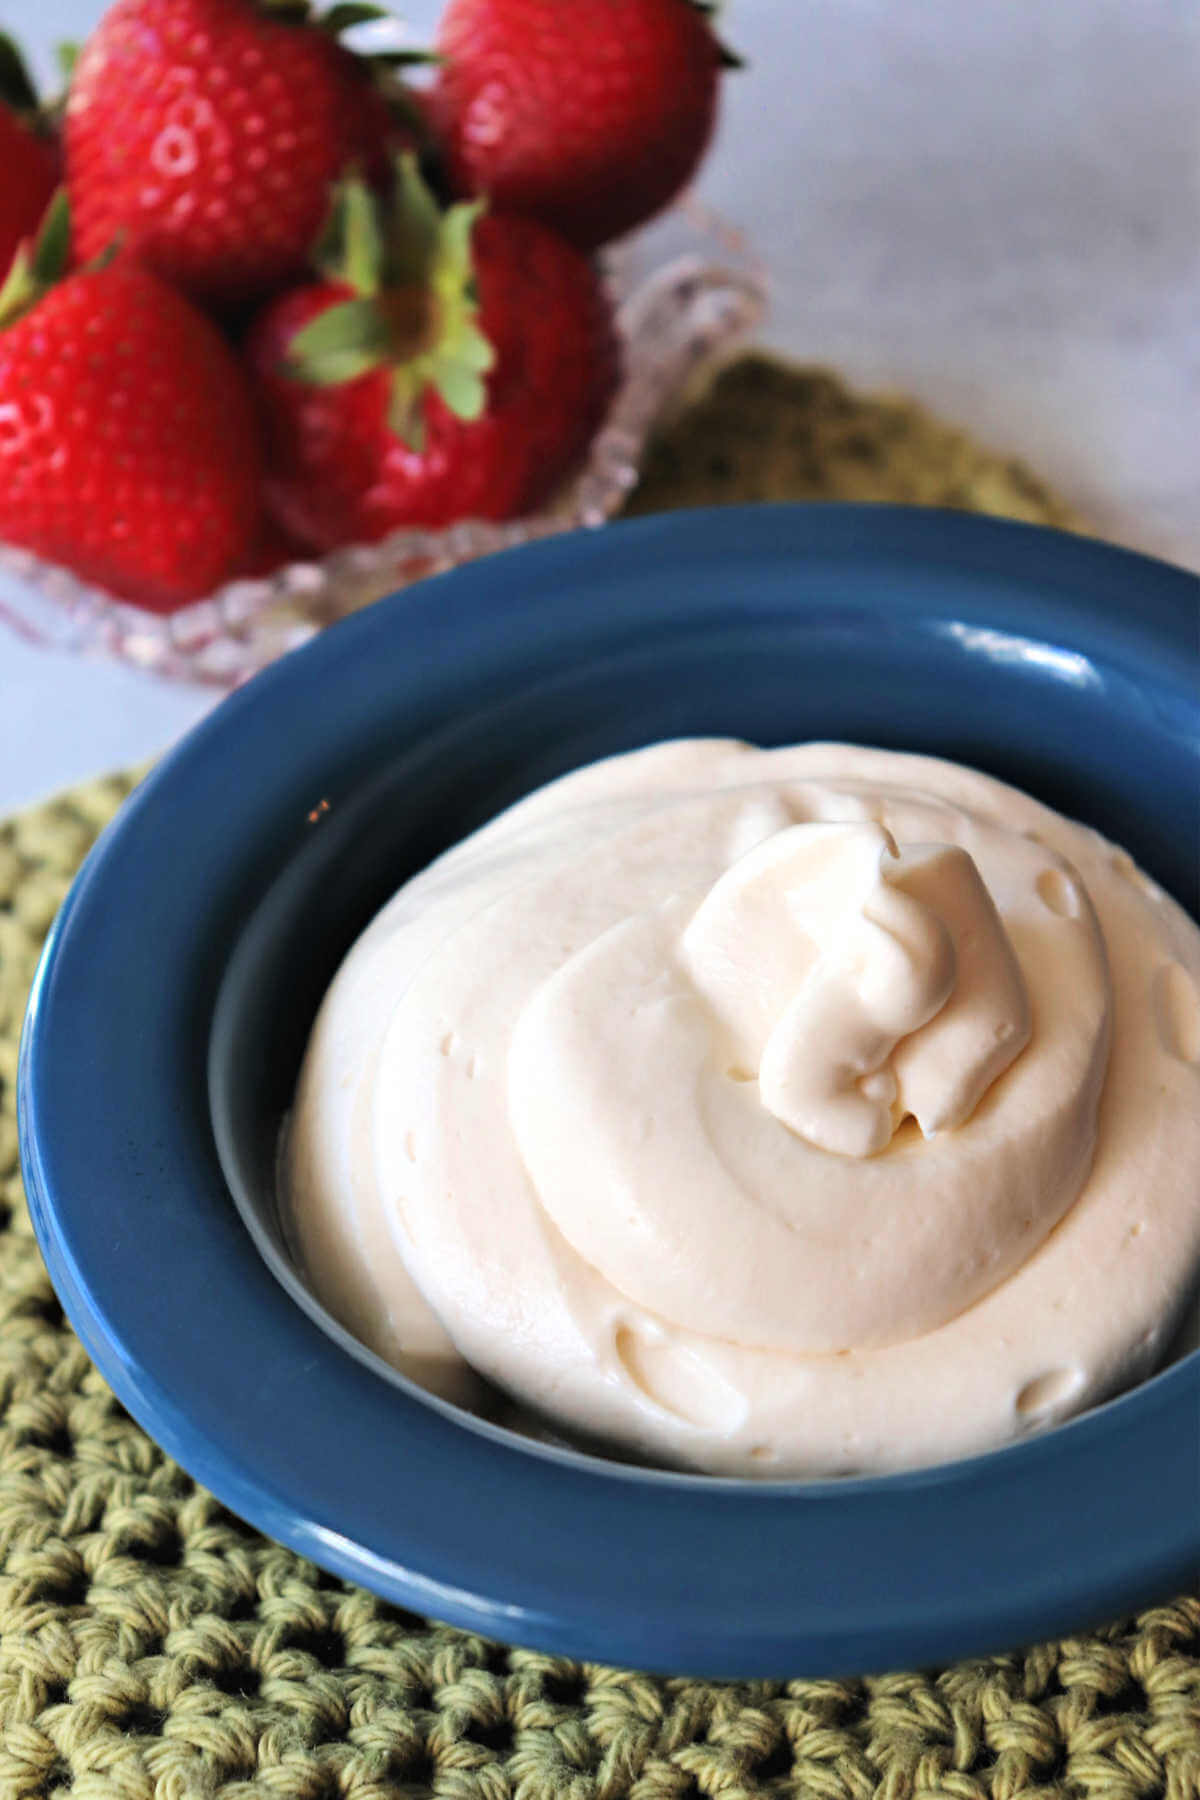 Bowl of keto cream cheese frosting with strawberries